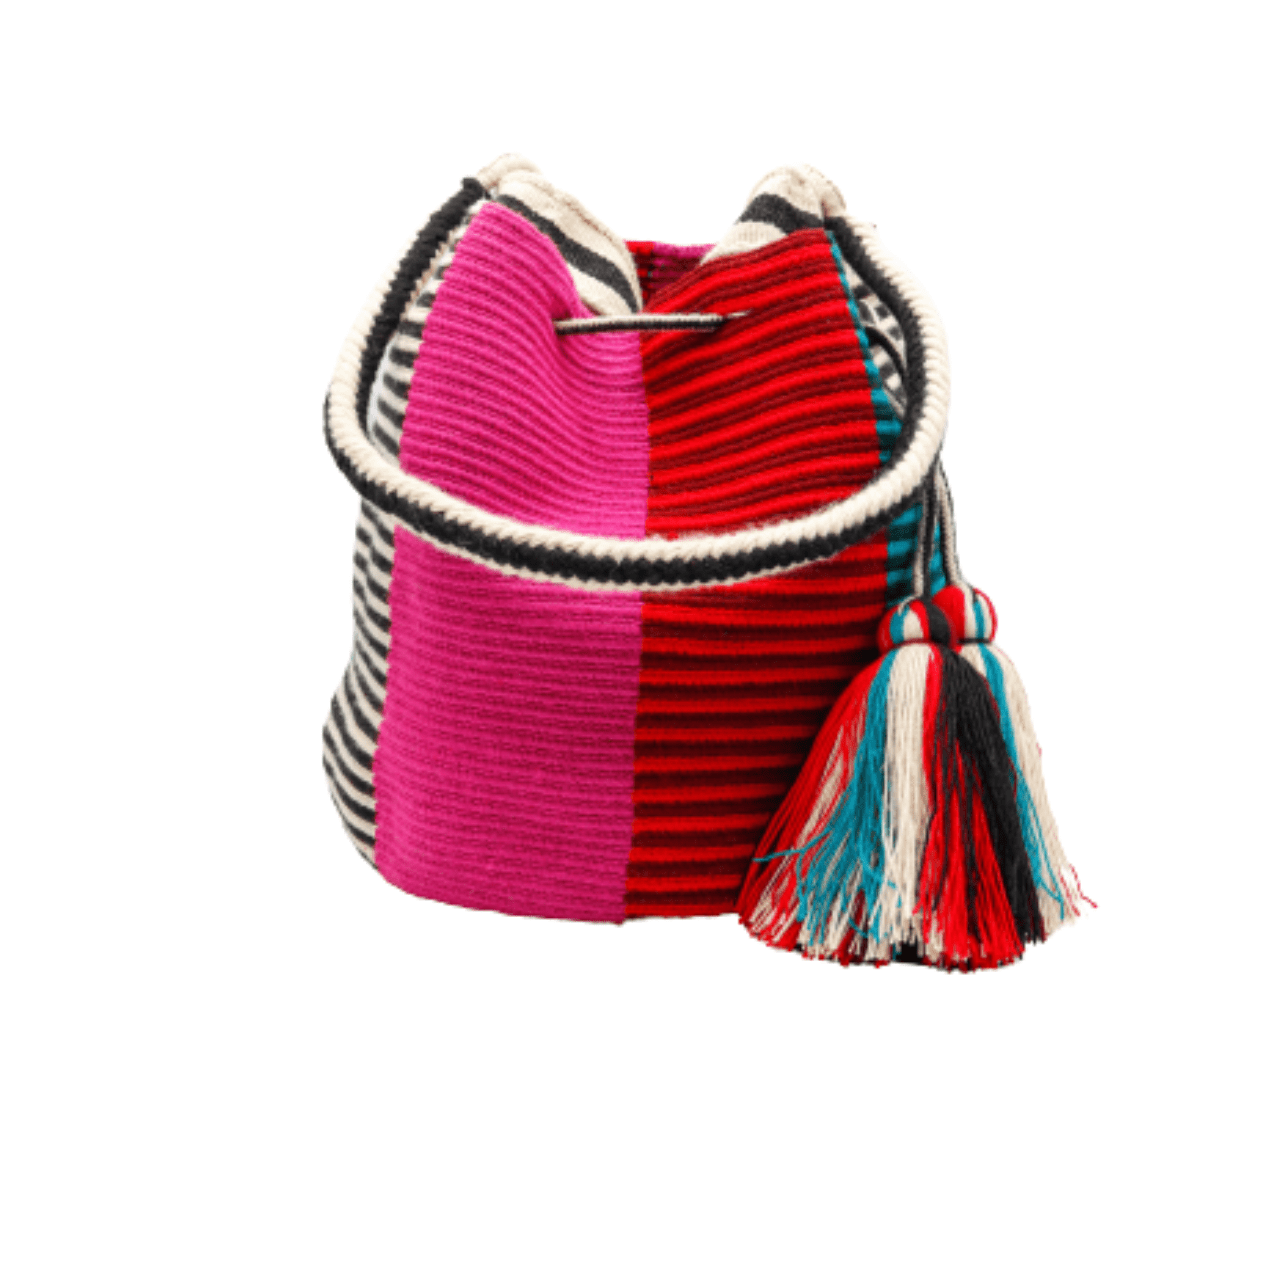 Jade Wayuu Bag with Double Handle - Vibrant Rainbow of Colors - Handcrafted Beauty and Versatile Style